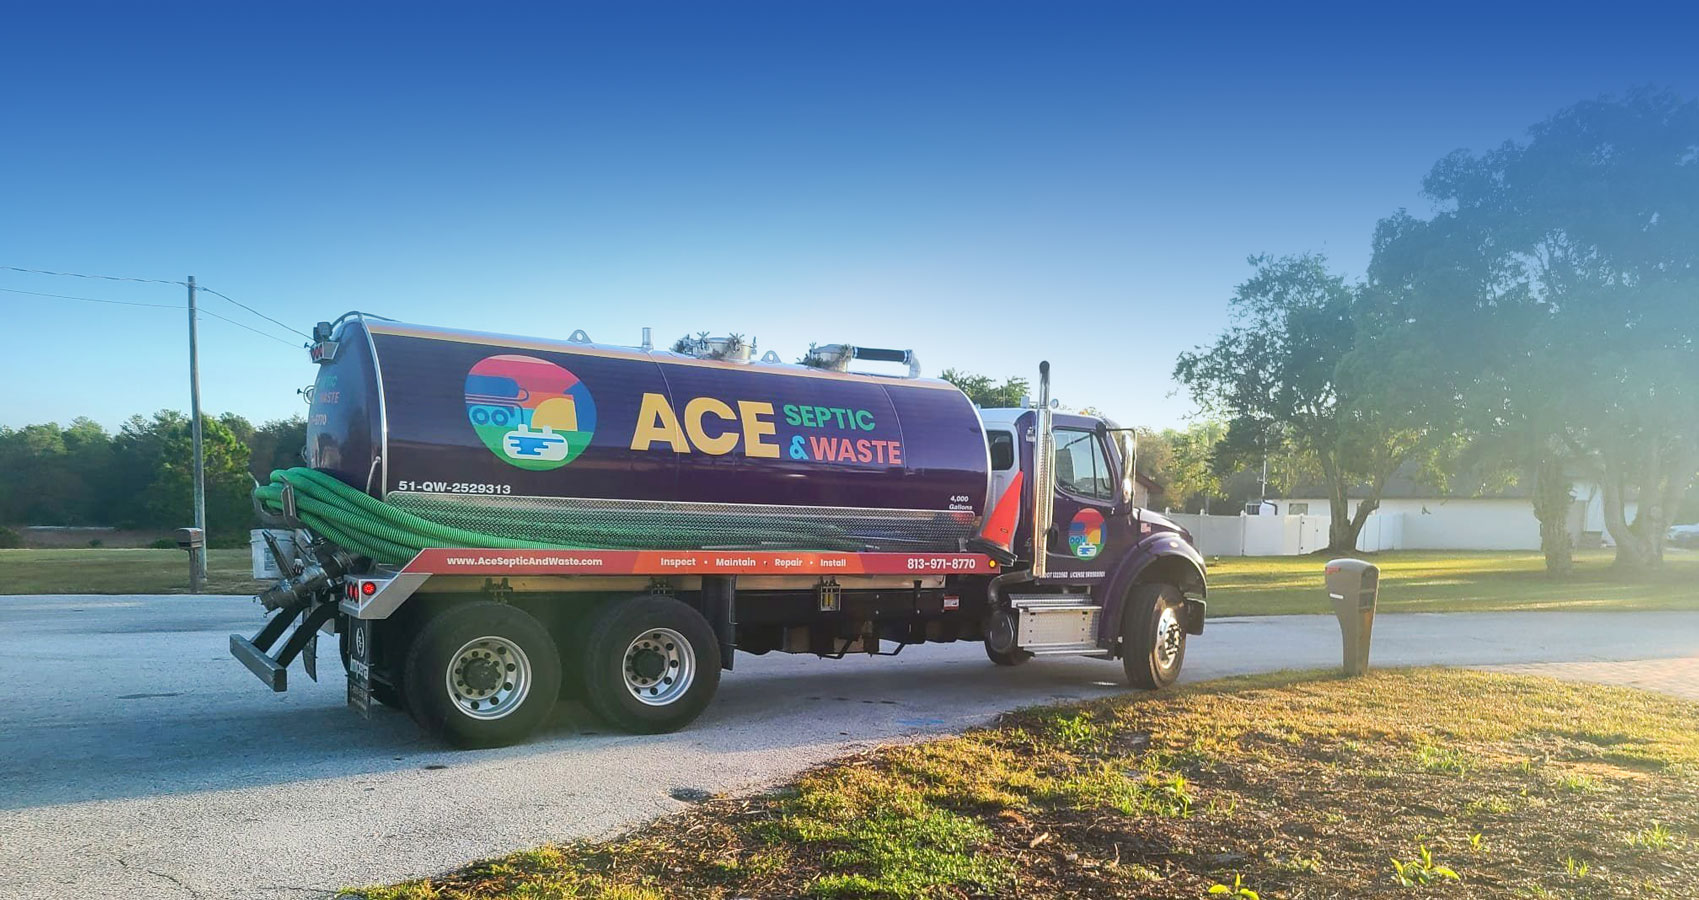 A purple septic truck with the logo ACE Septic & Waste on a street with a blue sky in the background.